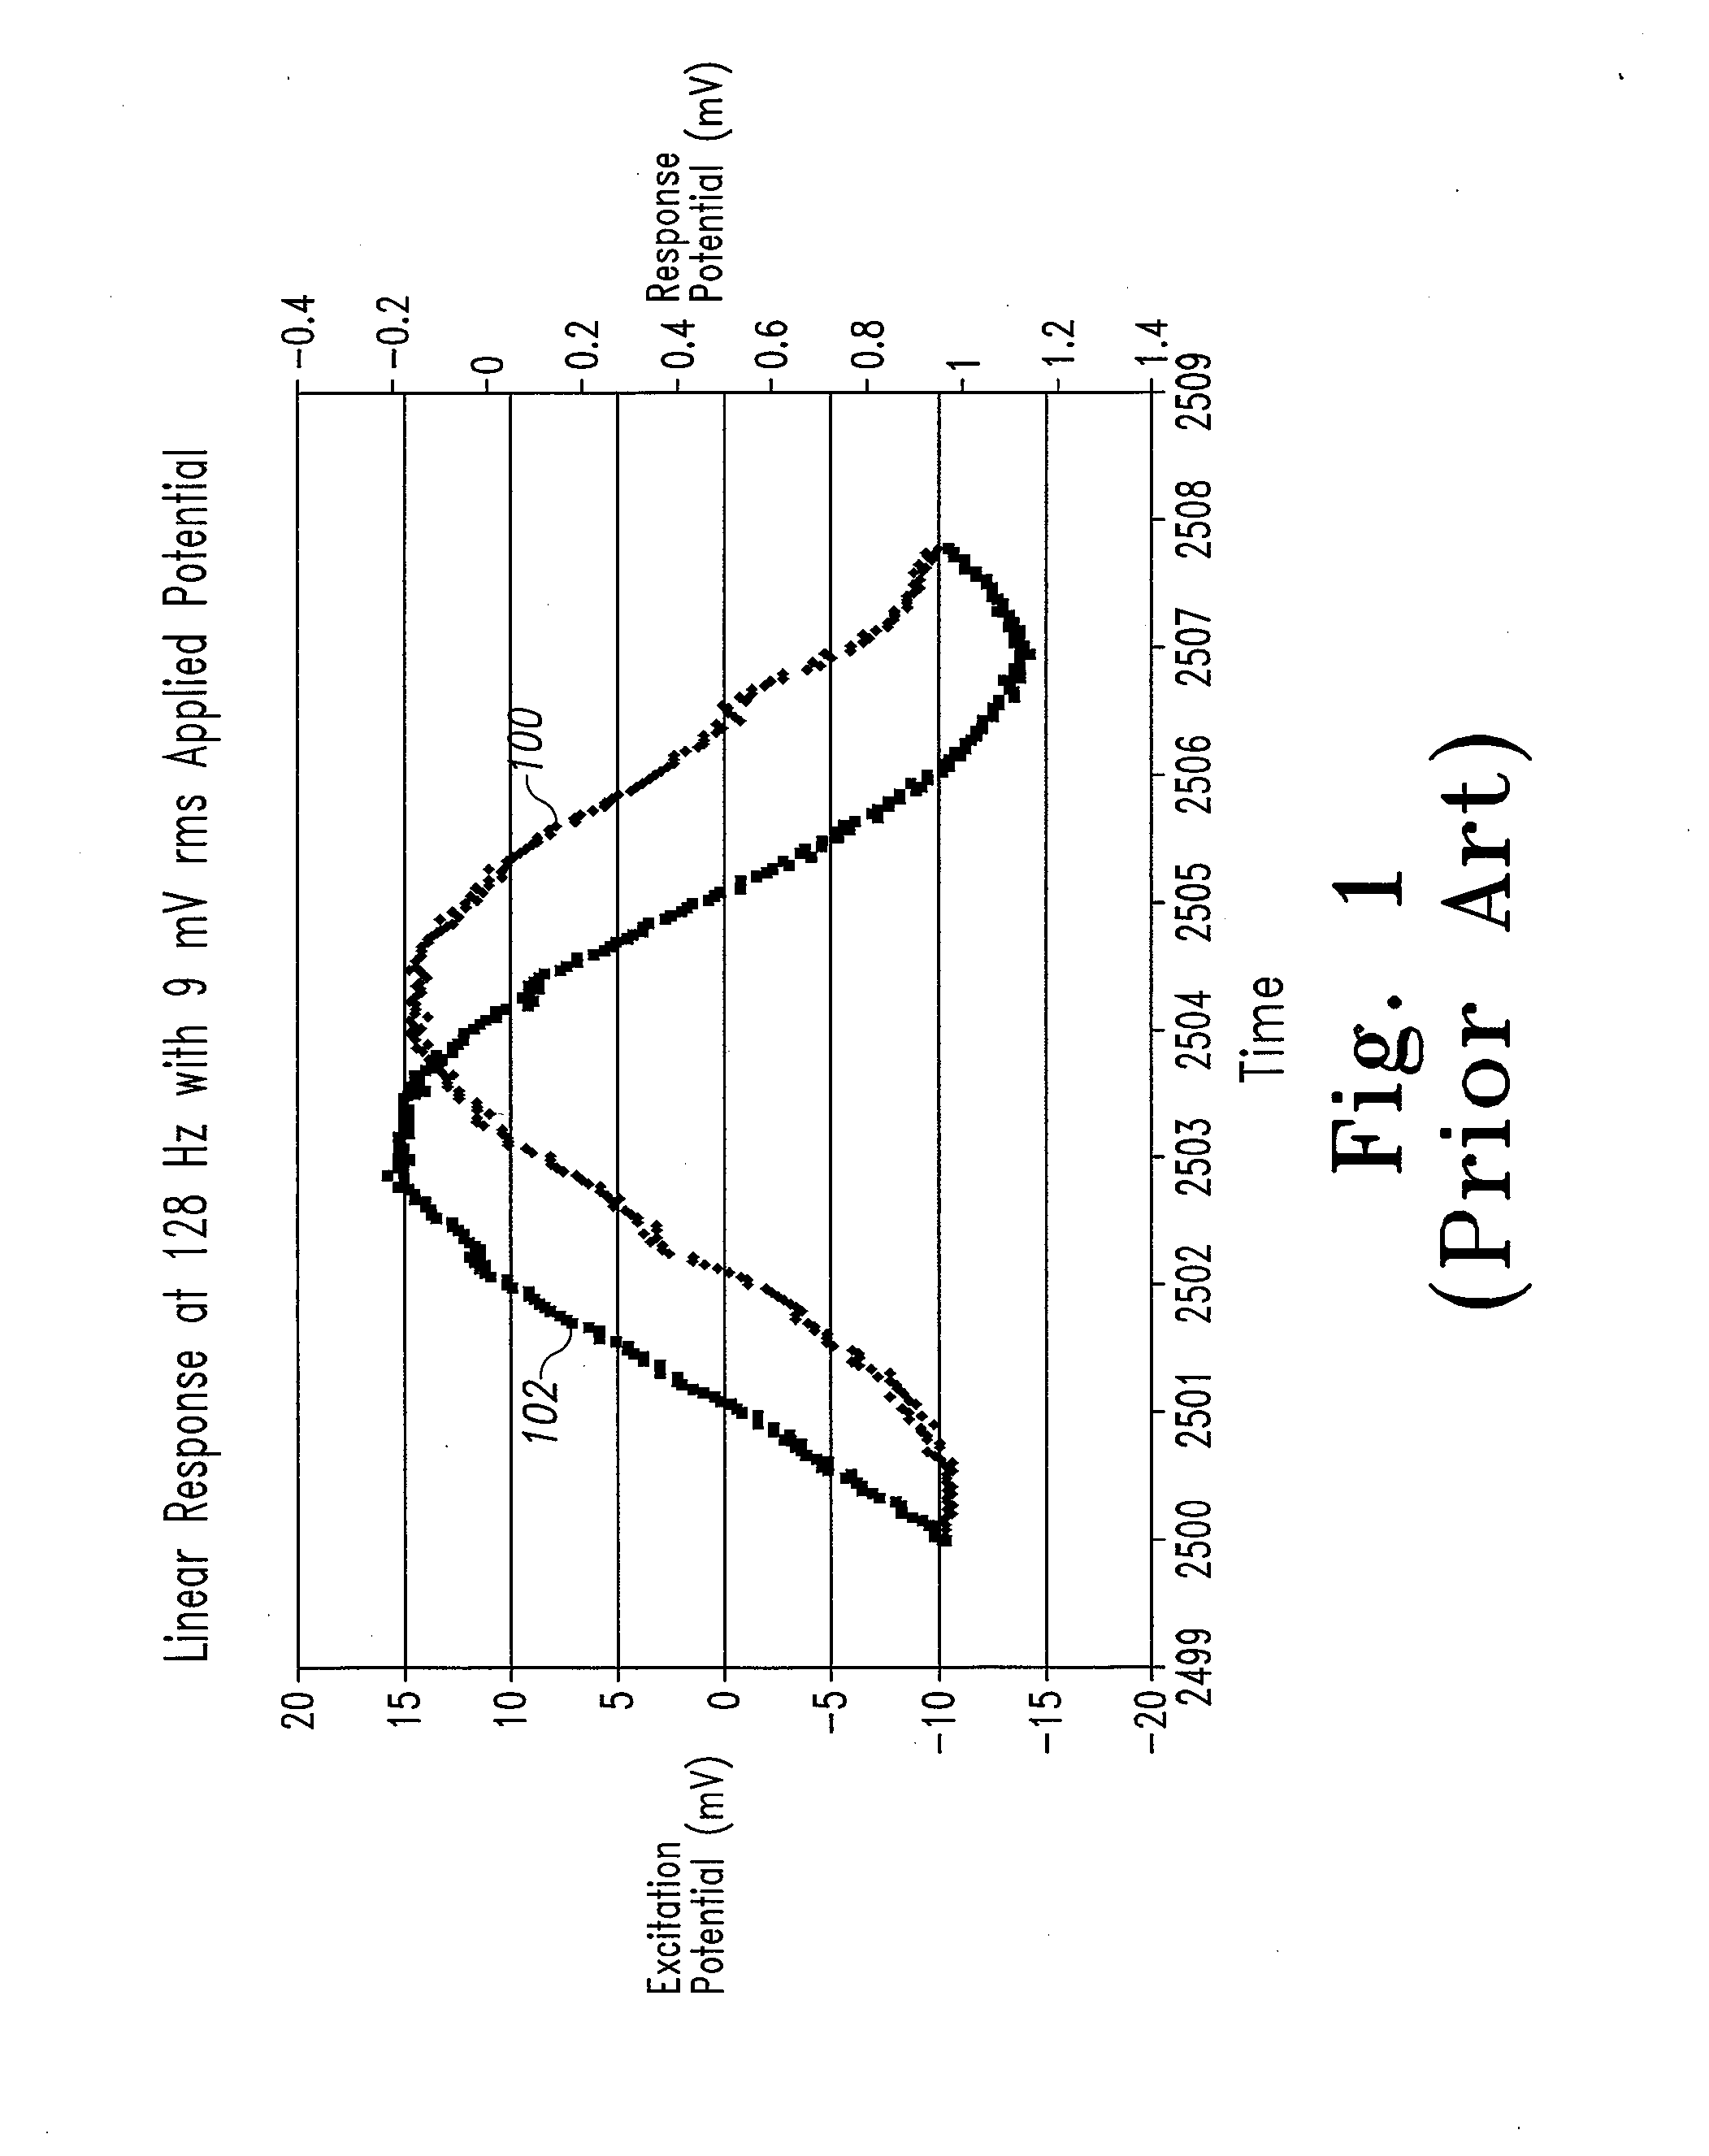 System and method for analyte measurement using a nonlinear sample response